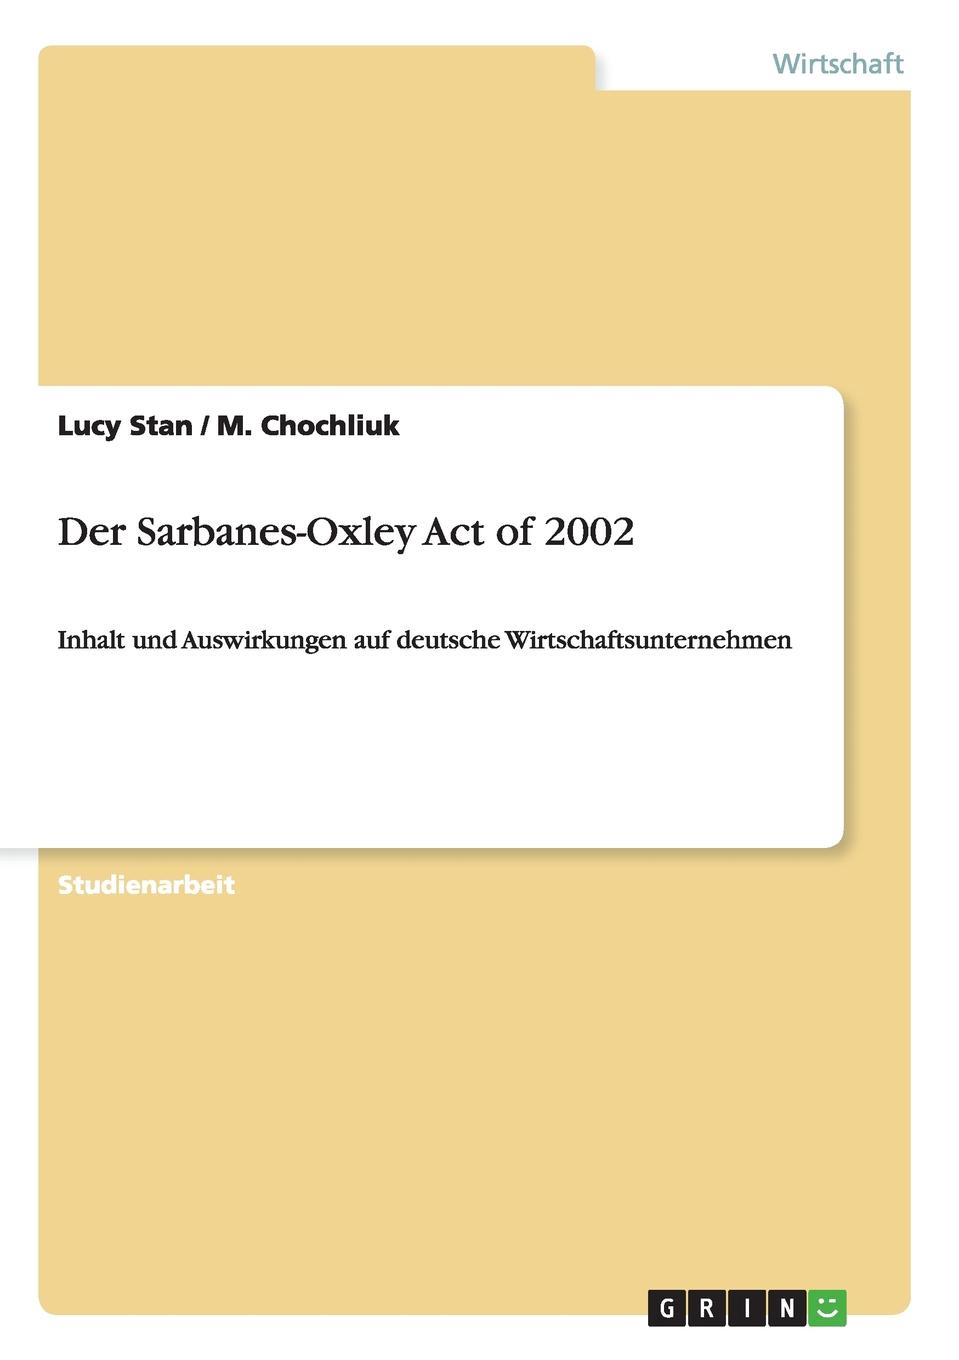 фото Der Sarbanes-Oxley Act of 2002